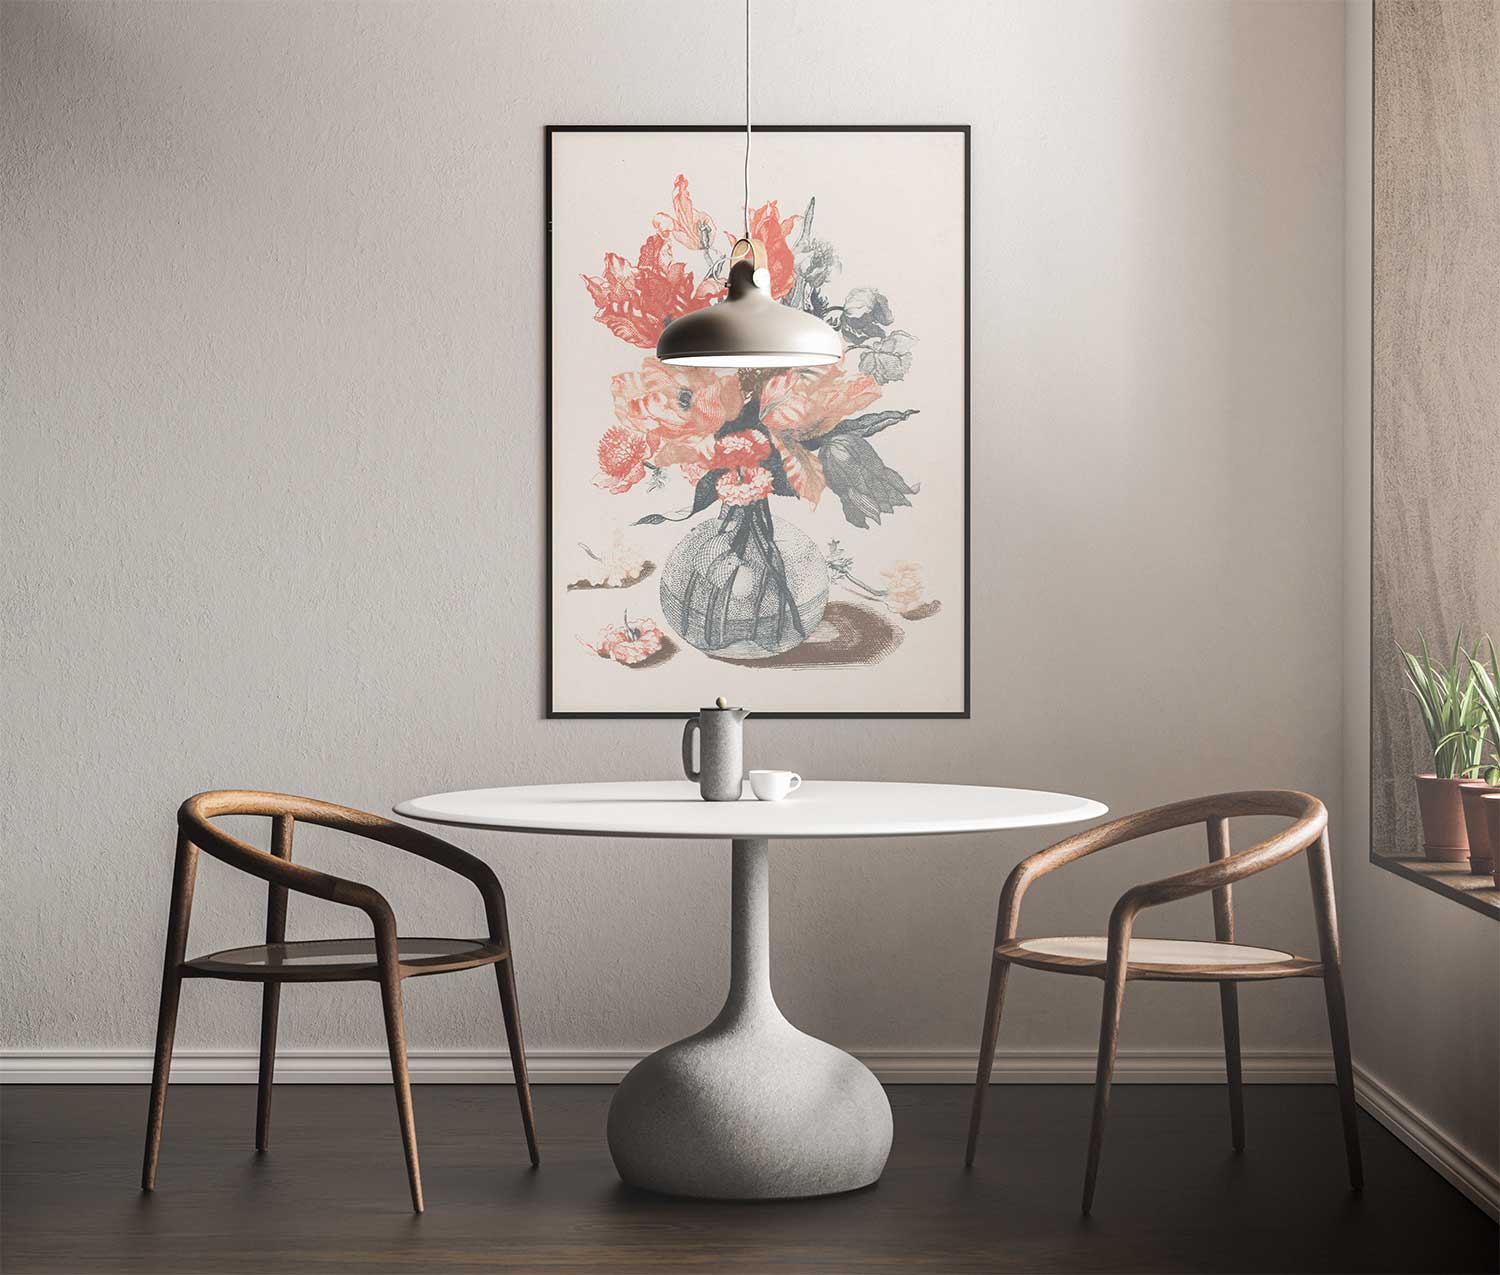 Free Poster Mockup Over Dinner Table